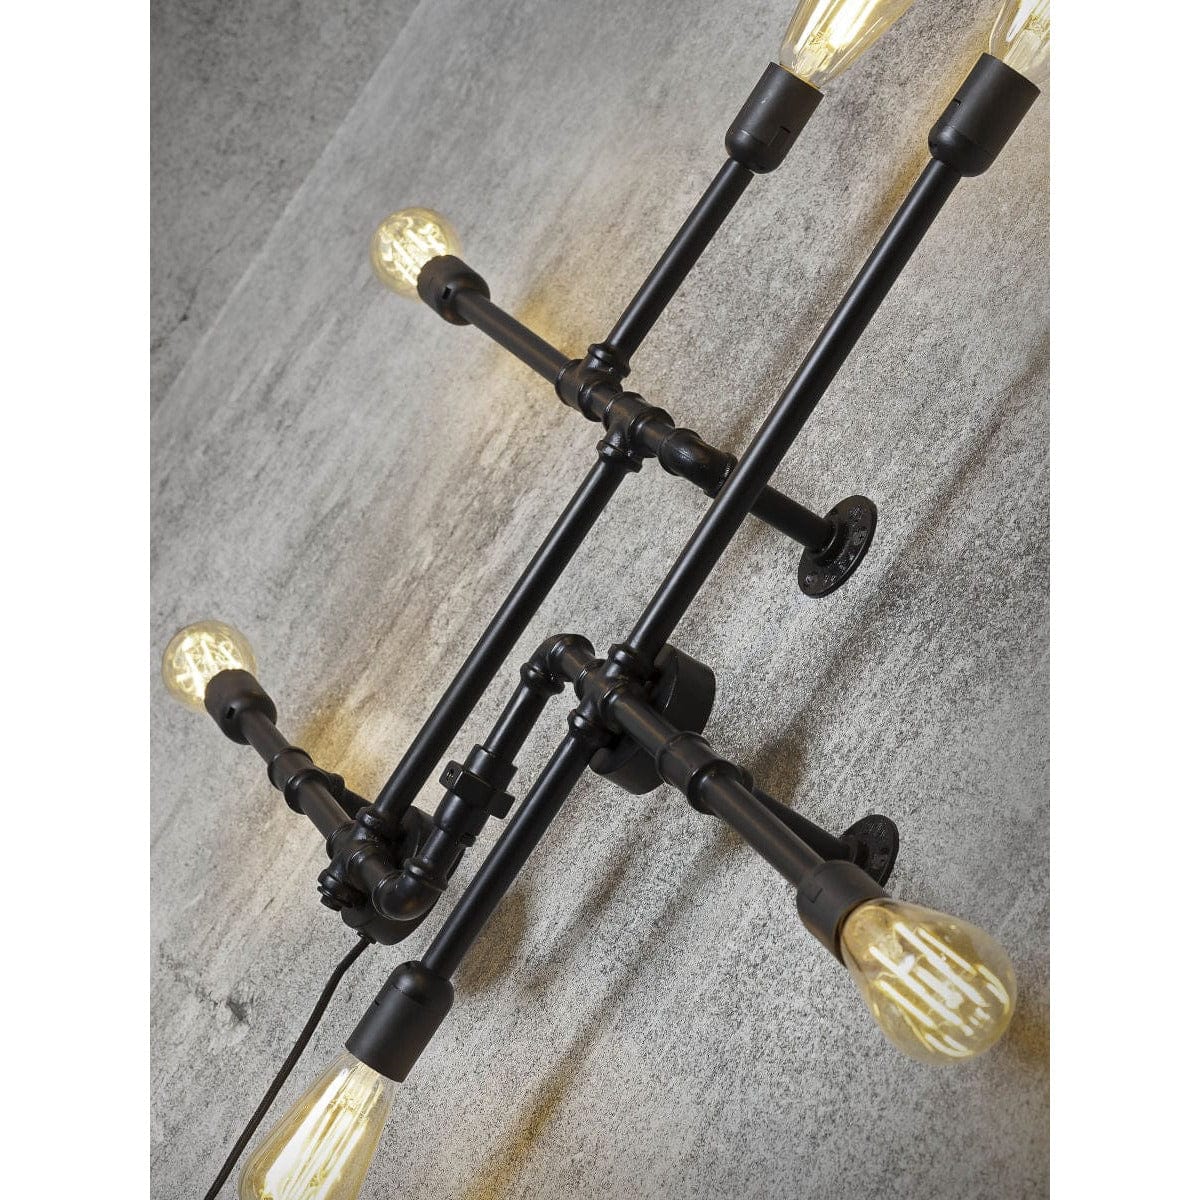 It's About RoMi Wall Lights Nashville Wall Lamp 3 Arm, Black